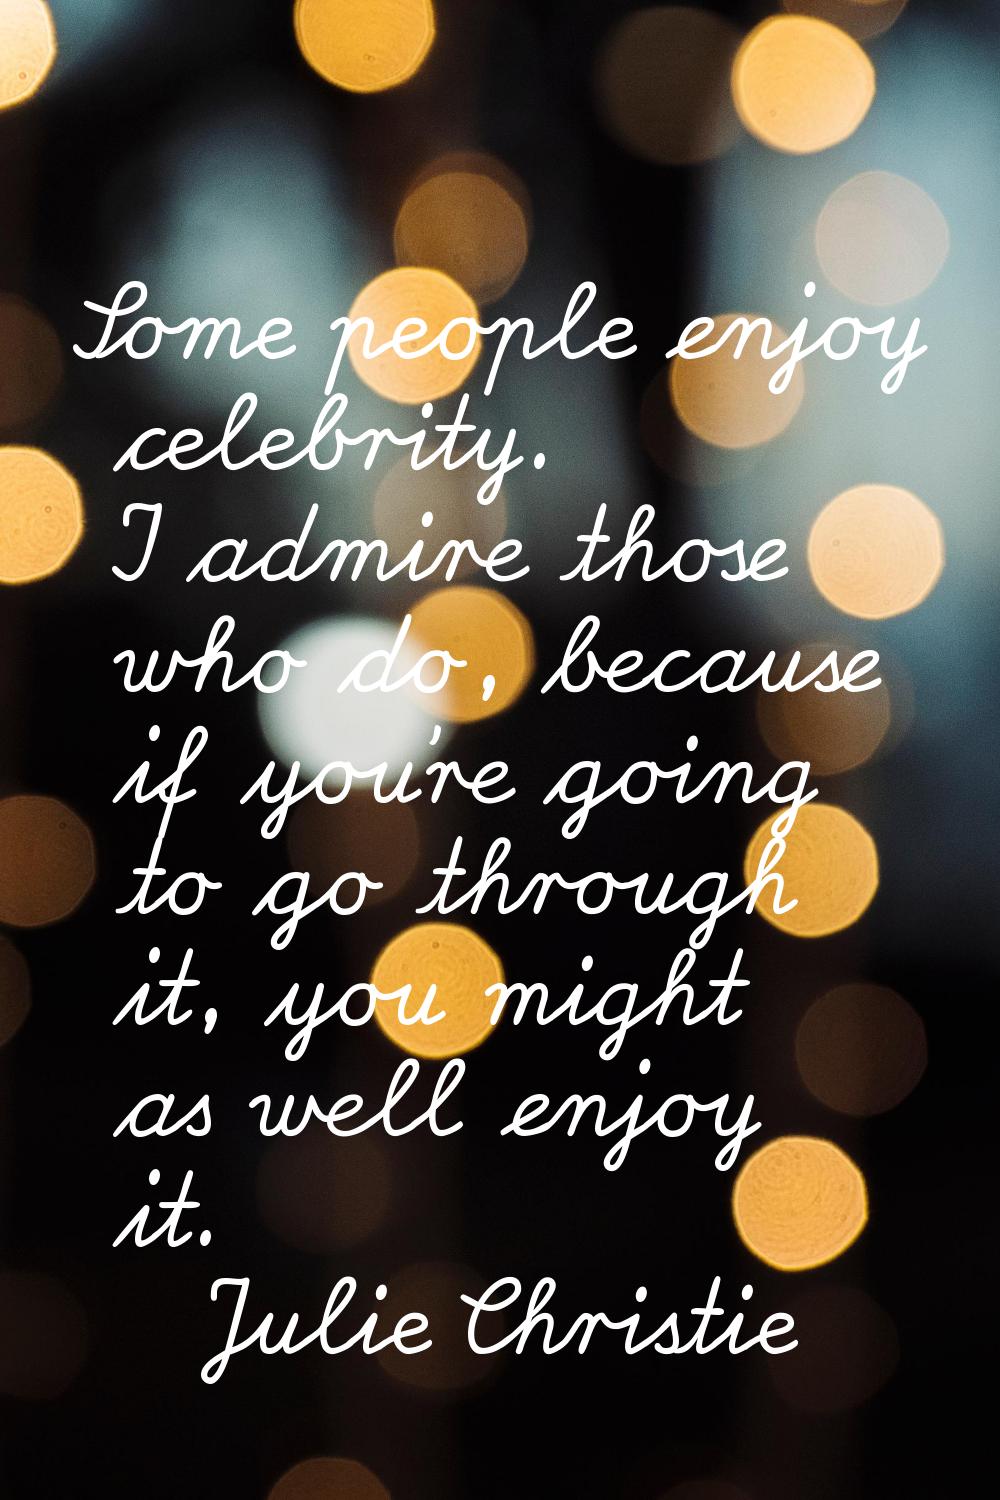 Some people enjoy celebrity. I admire those who do, because if you're going to go through it, you m